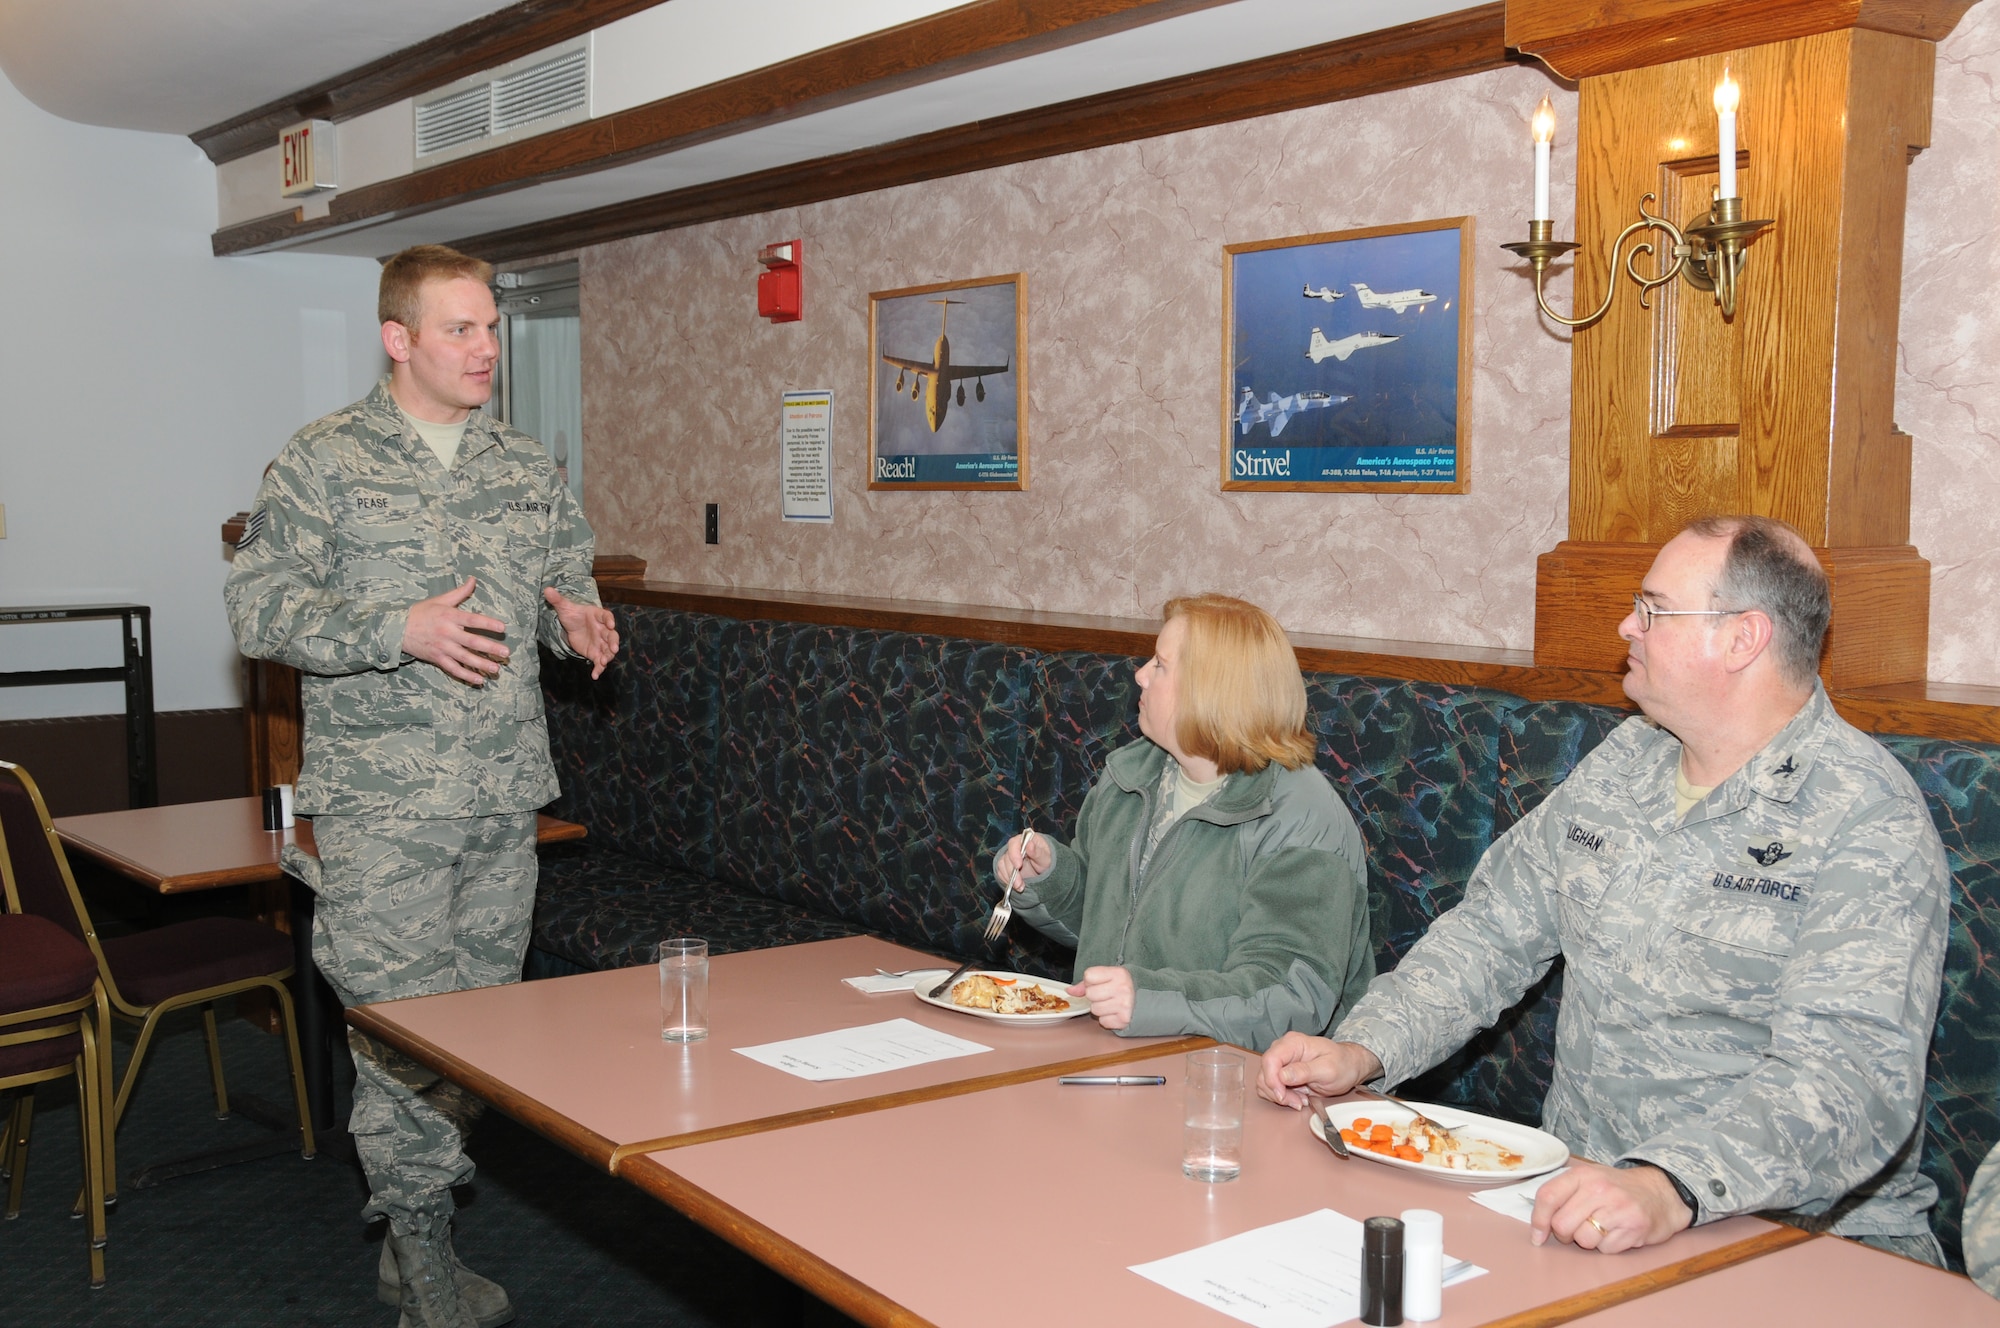 Tech. Sgt. Stephen Pease the dining hall supervisor explains to judges Lt. Col. Linda Blaszak the 107th Force Support Squadron Commander and Col. Timothy Vaughan the 107th Mission Support Group Commander the concept behind the food challenge. "We have done really well in our inspections. These guys have worked cohesively as a team and it is almost a family atmosphere.  At this time what we wanted to do was challenge them. This was a chance to get them to step it up," Sgt. Pease said. (U.S. Air Force photo/Staff Sgt. Peter Dean)